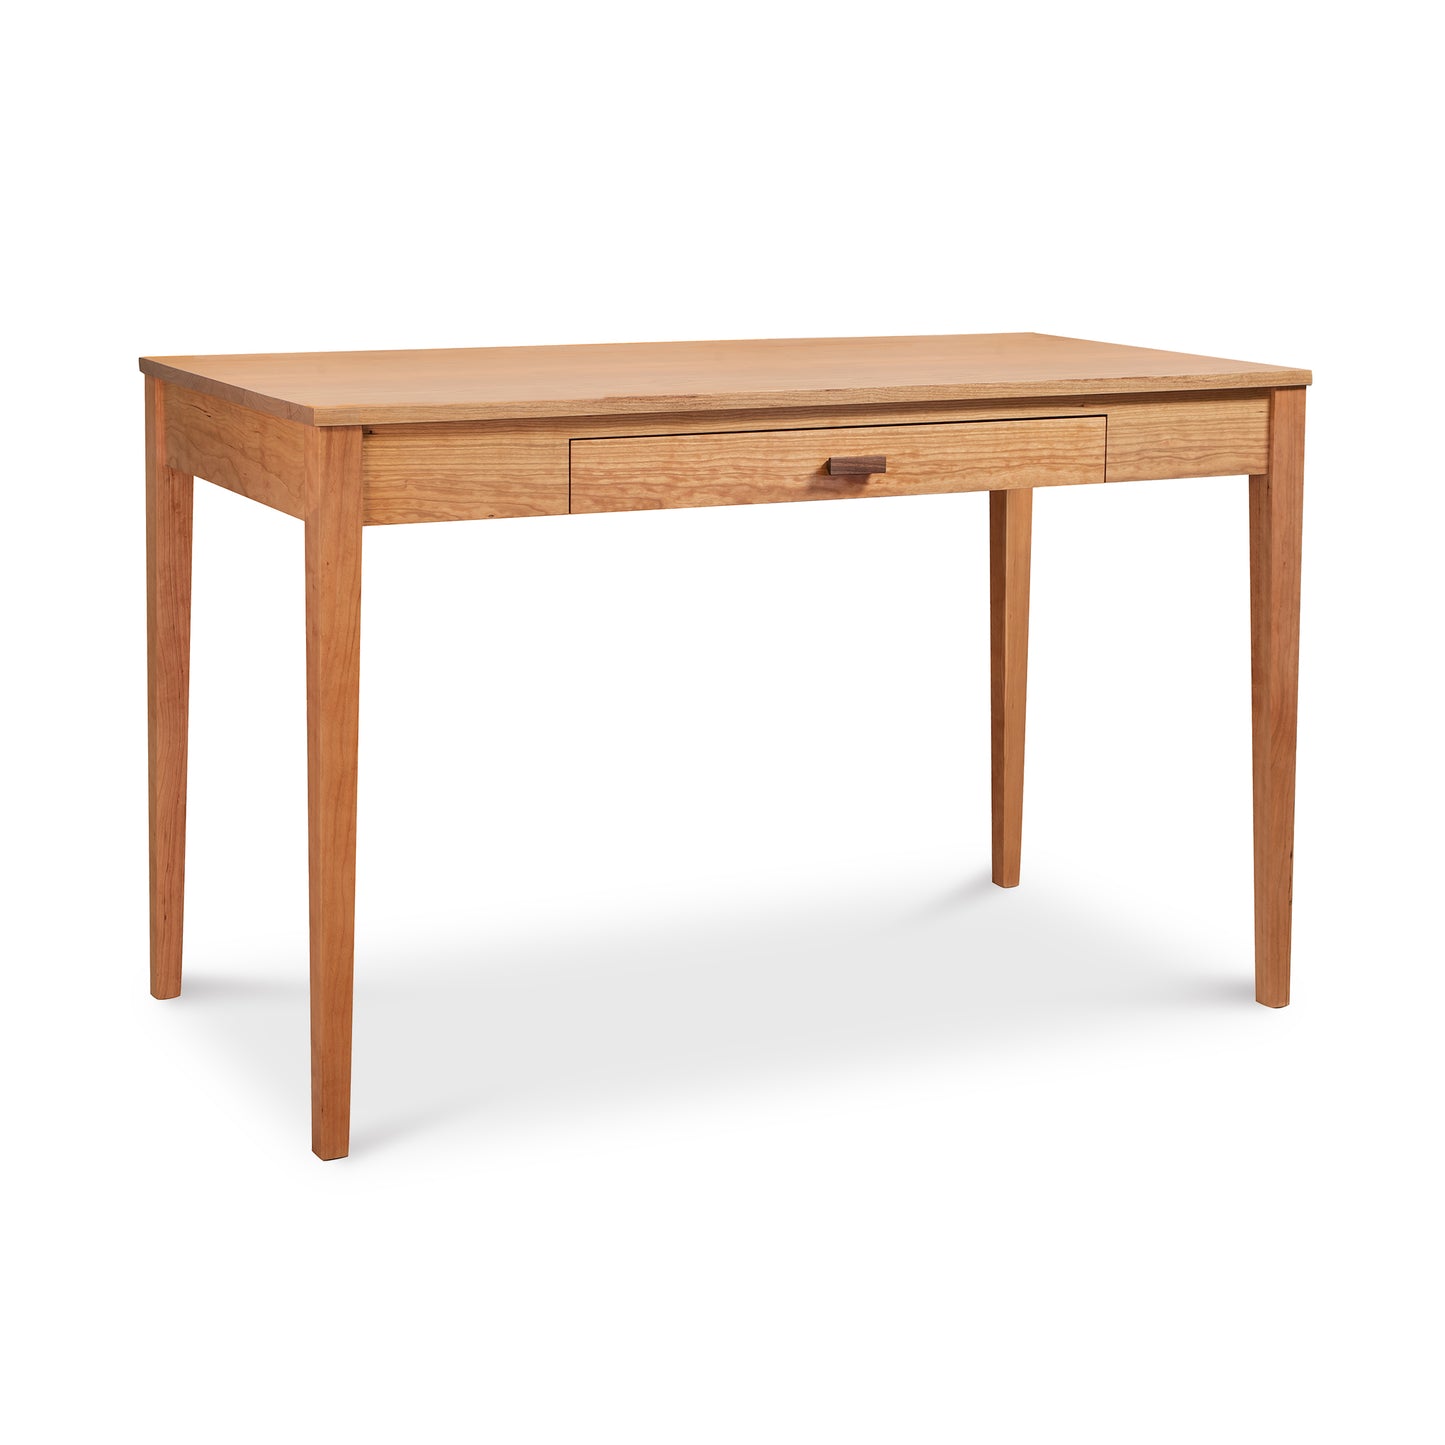 A Maple Corner Woodworks Andover Modern Writing Desk made of solid wood with a drawer, showcasing a contemporary style.